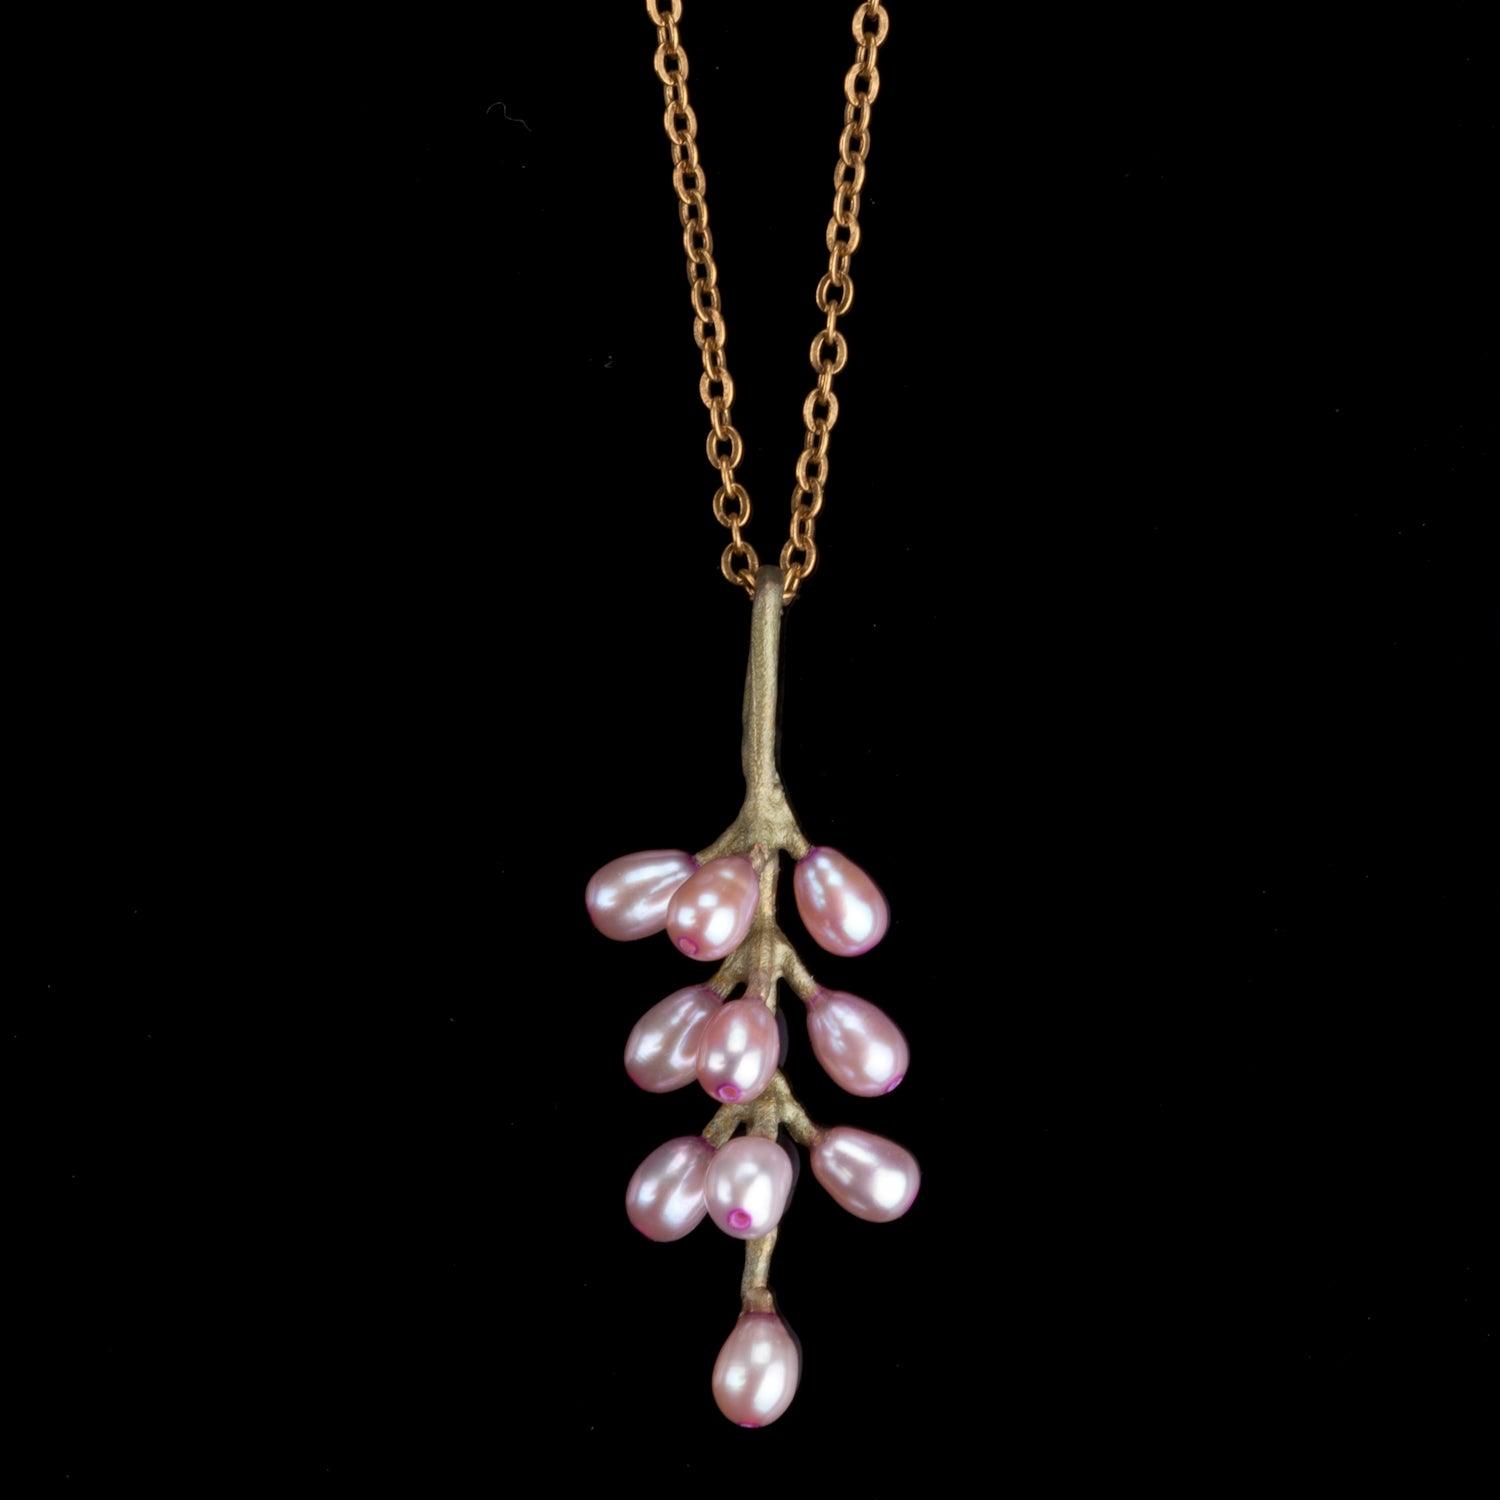 French Lavender Pendant - All Pearls - Michael Michaud Jewellery